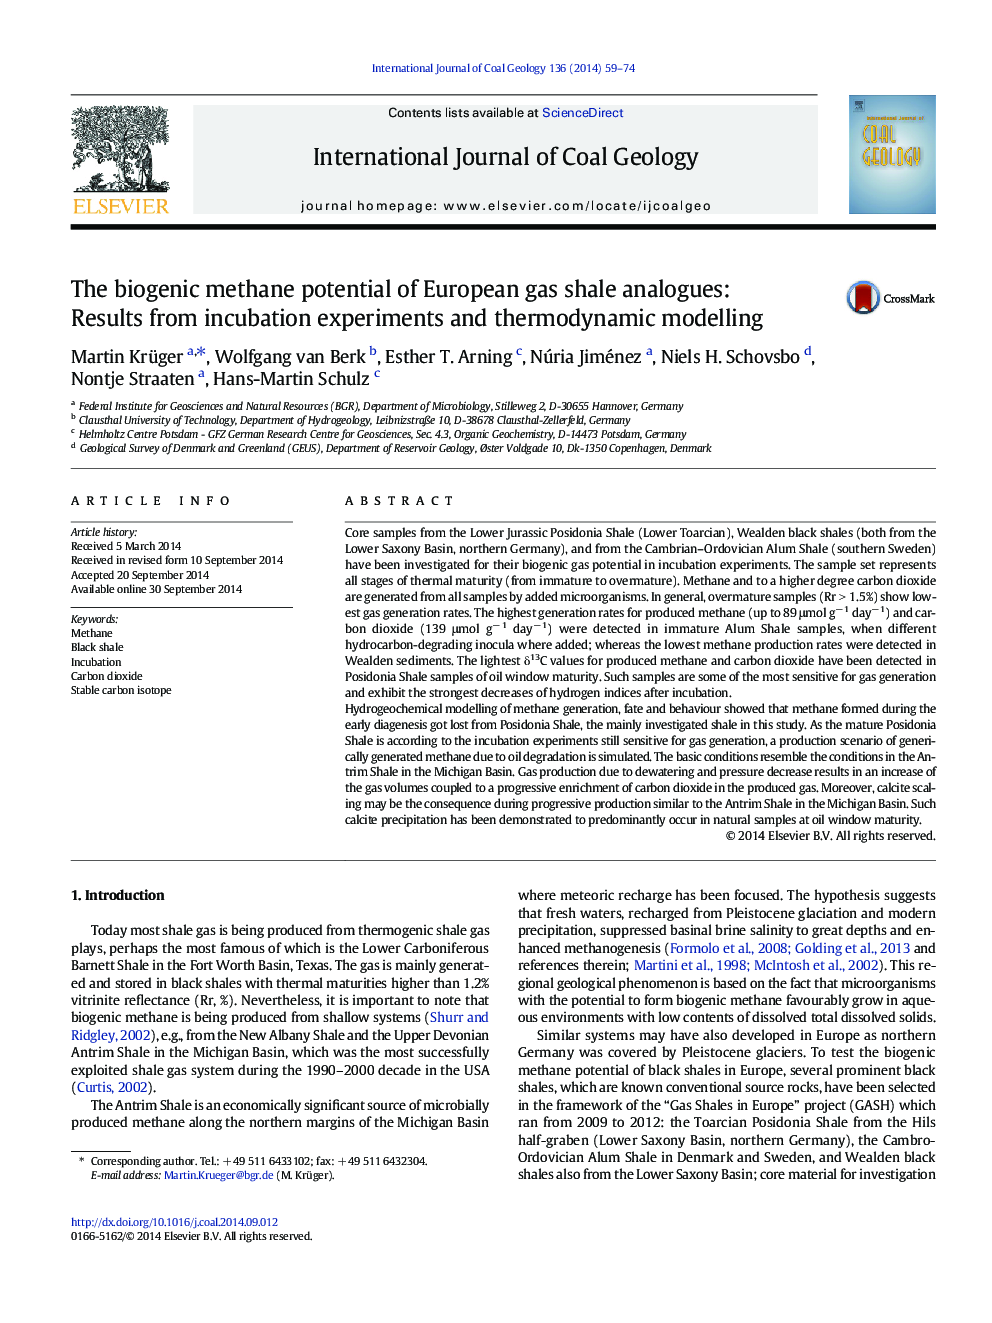 The biogenic methane potential of European gas shale analogues: Results from incubation experiments and thermodynamic modelling